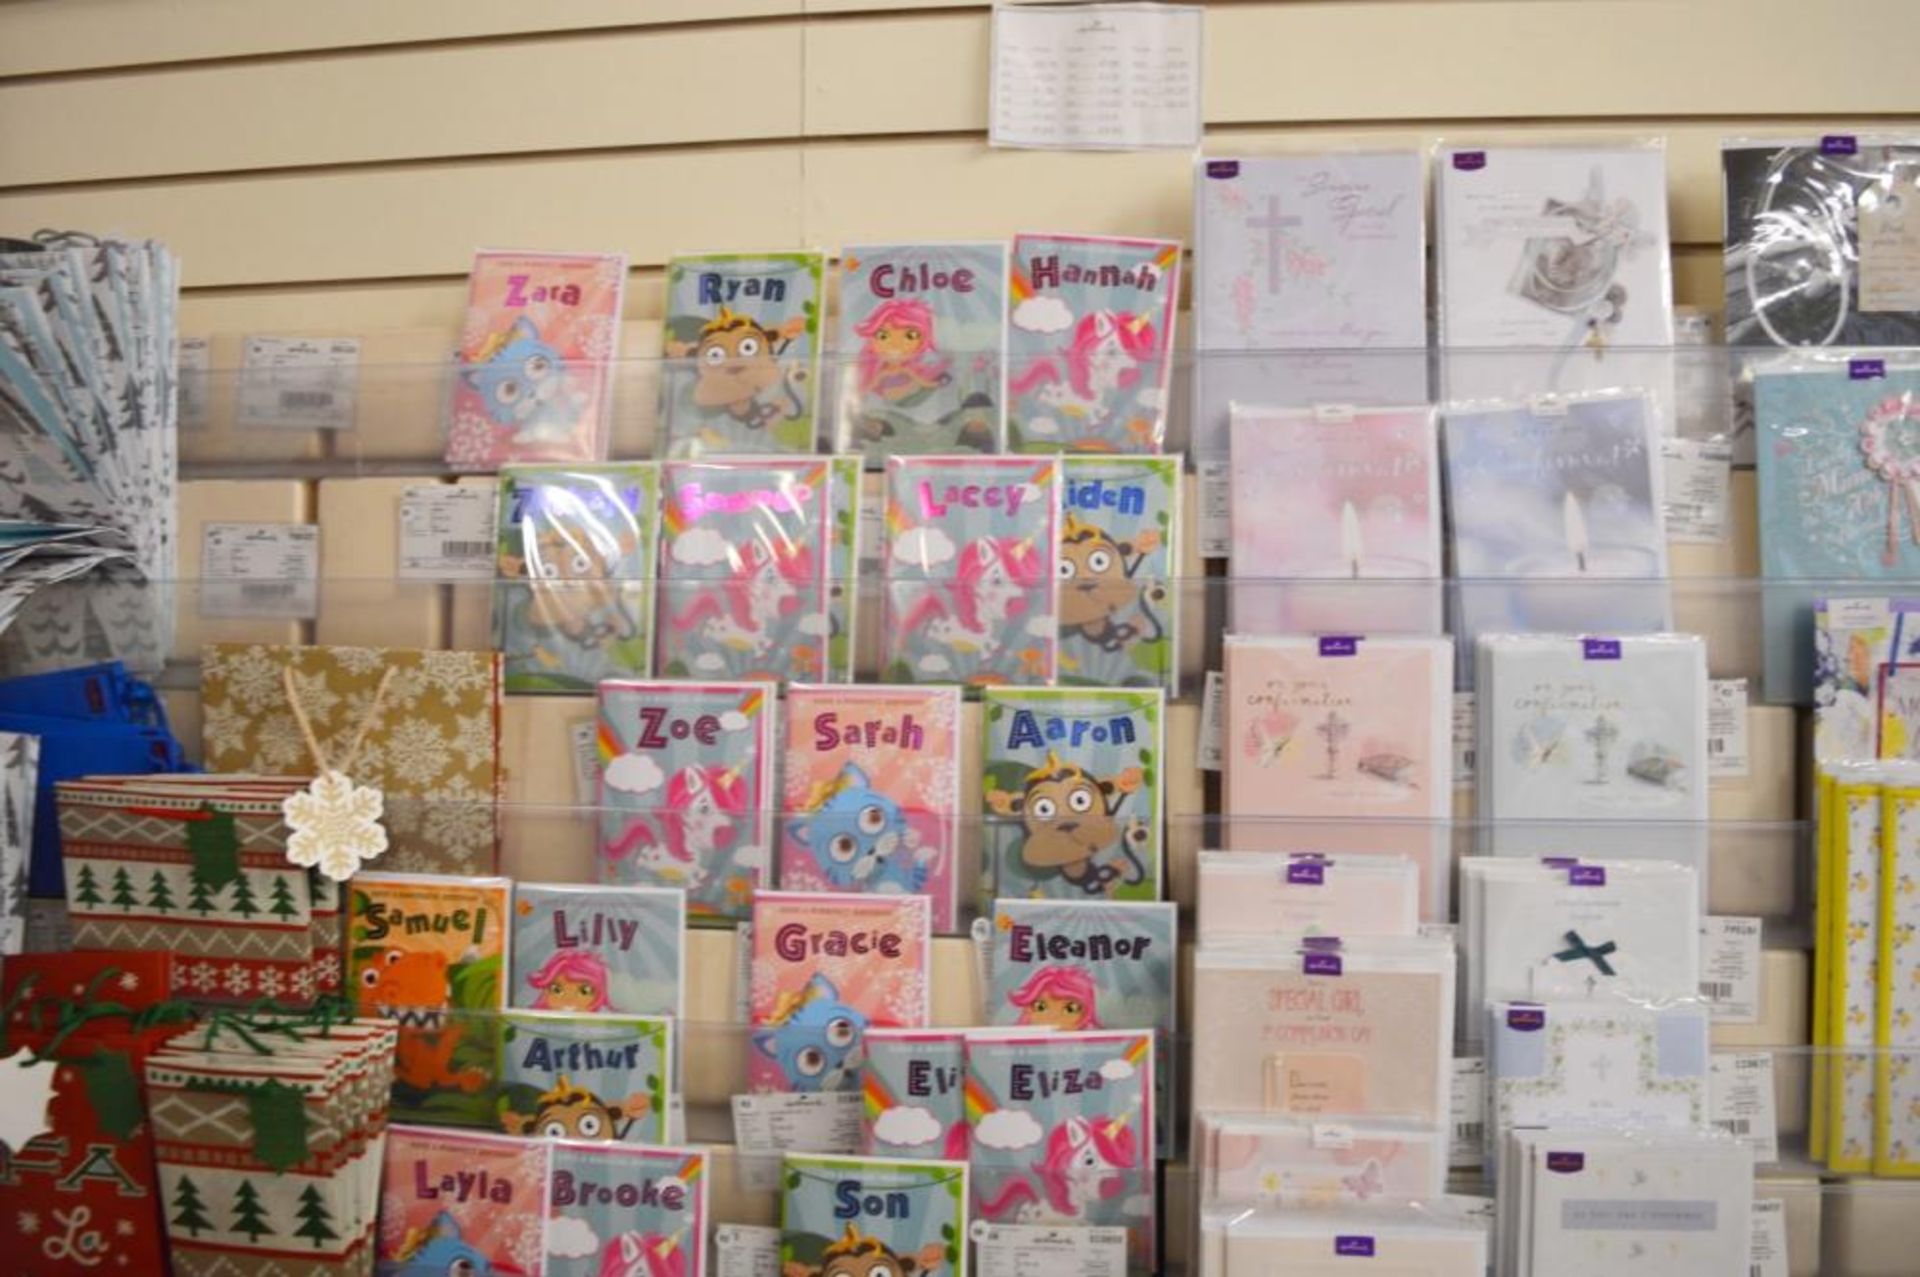 1 x Retail Card Stand With Stock - Includes 21ft Card Stand and Huge Amount of Cards For All Occasio - Image 8 of 20